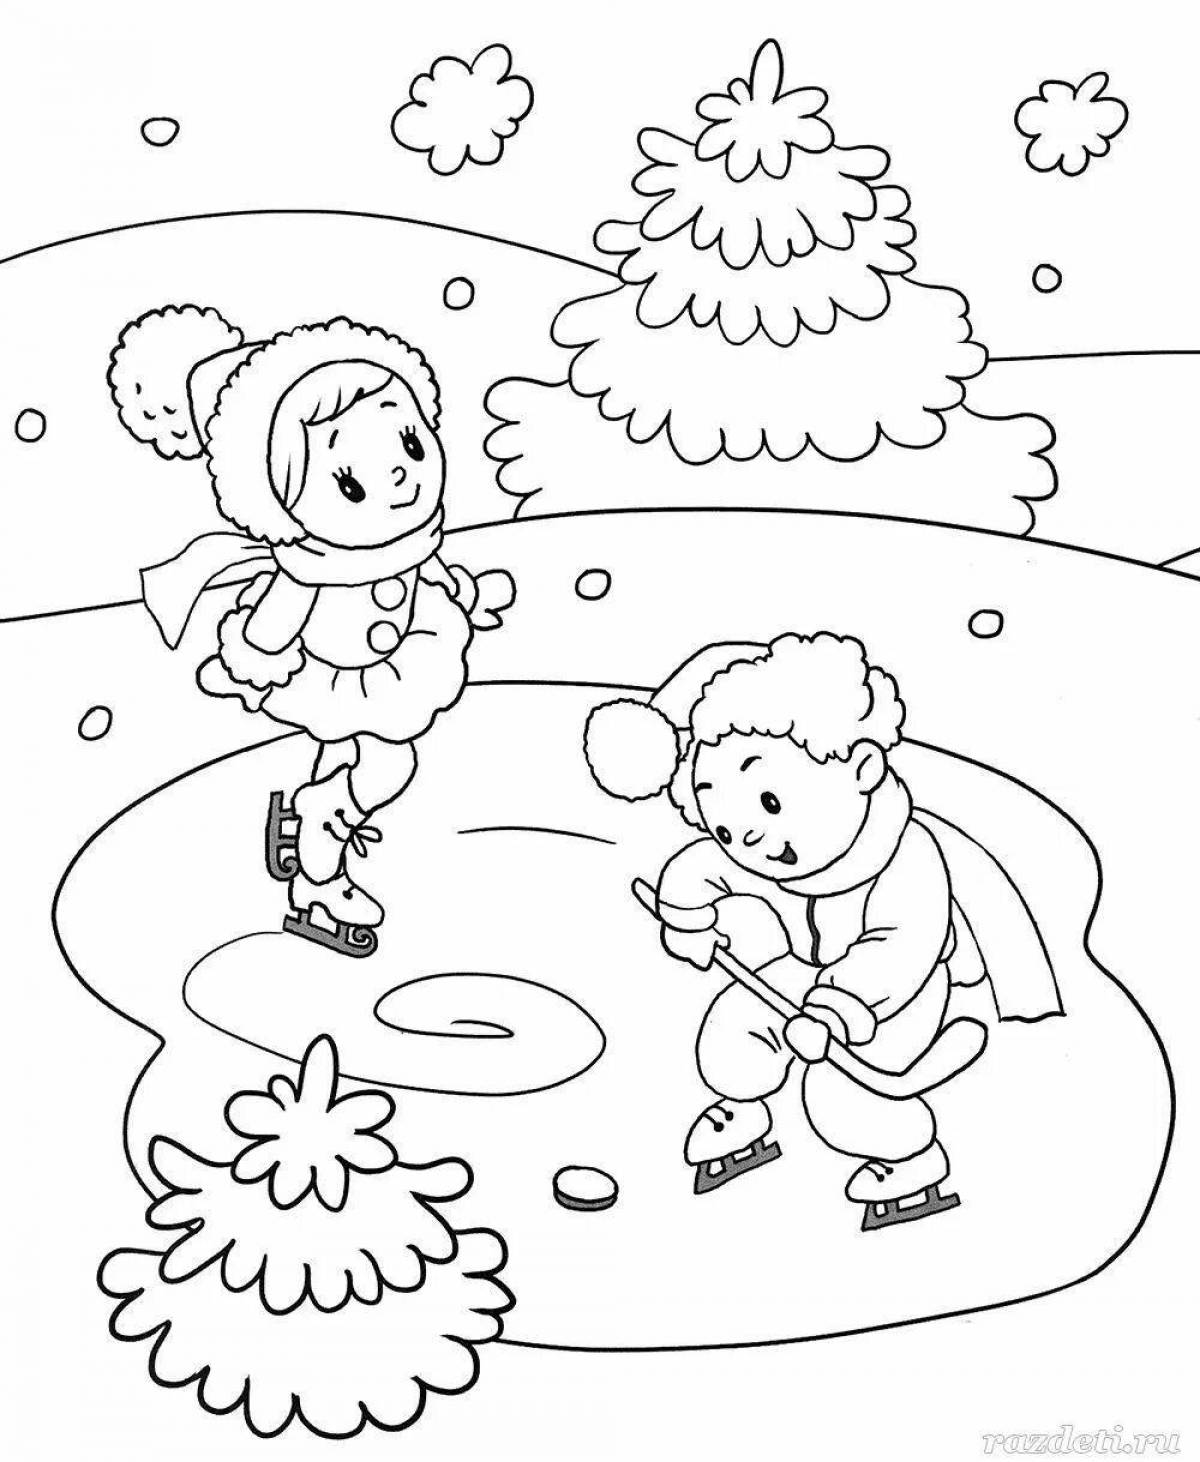 Fun coloring winter activities for children 6 years old